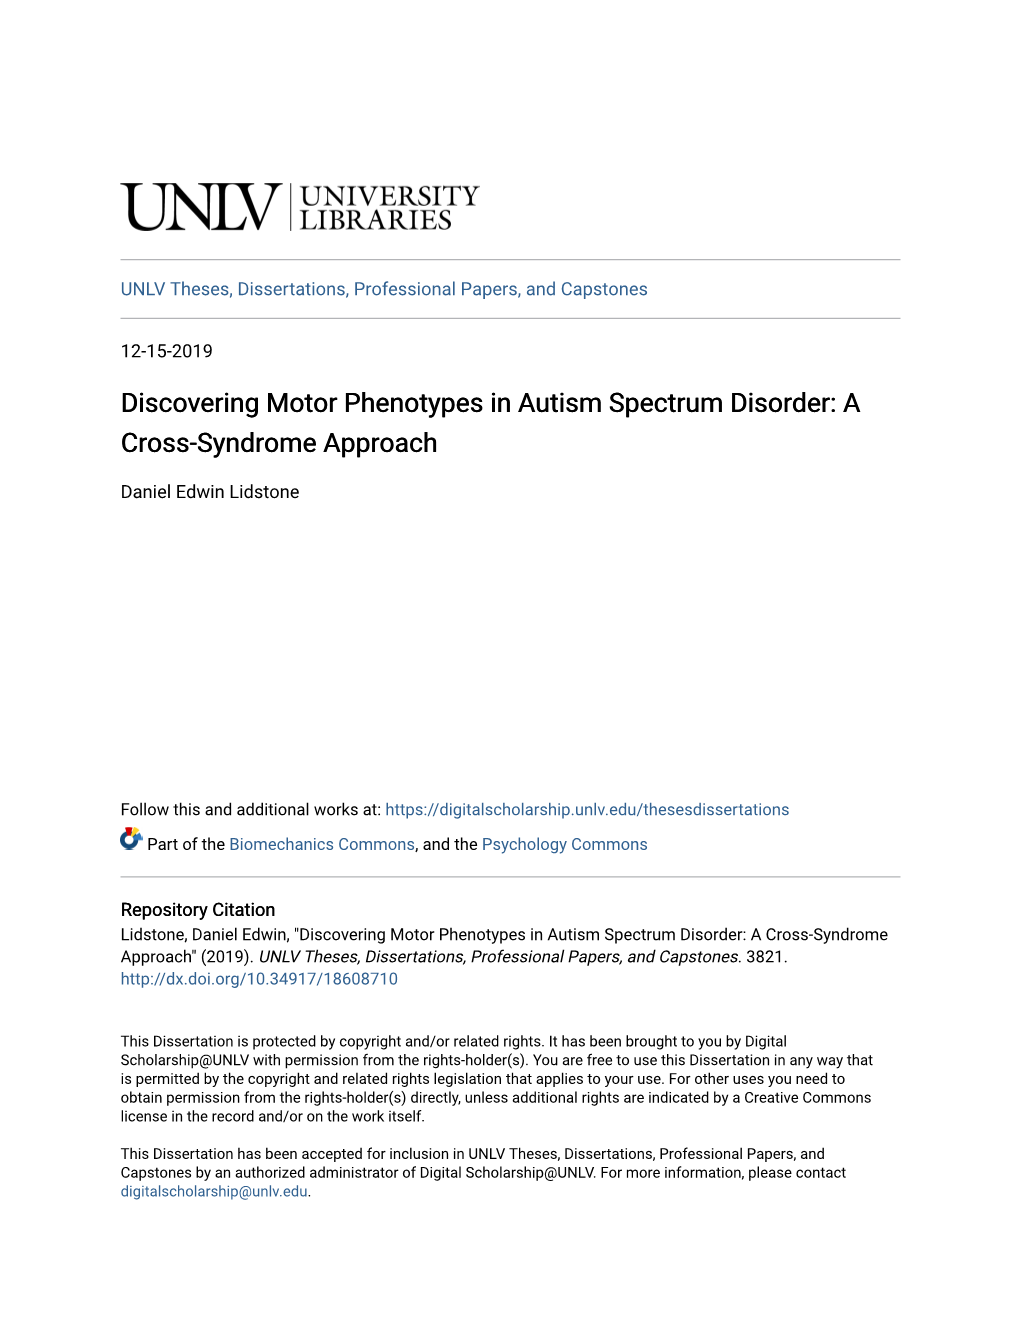 Discovering Motor Phenotypes in Autism Spectrum Disorder: a Cross-Syndrome Approach